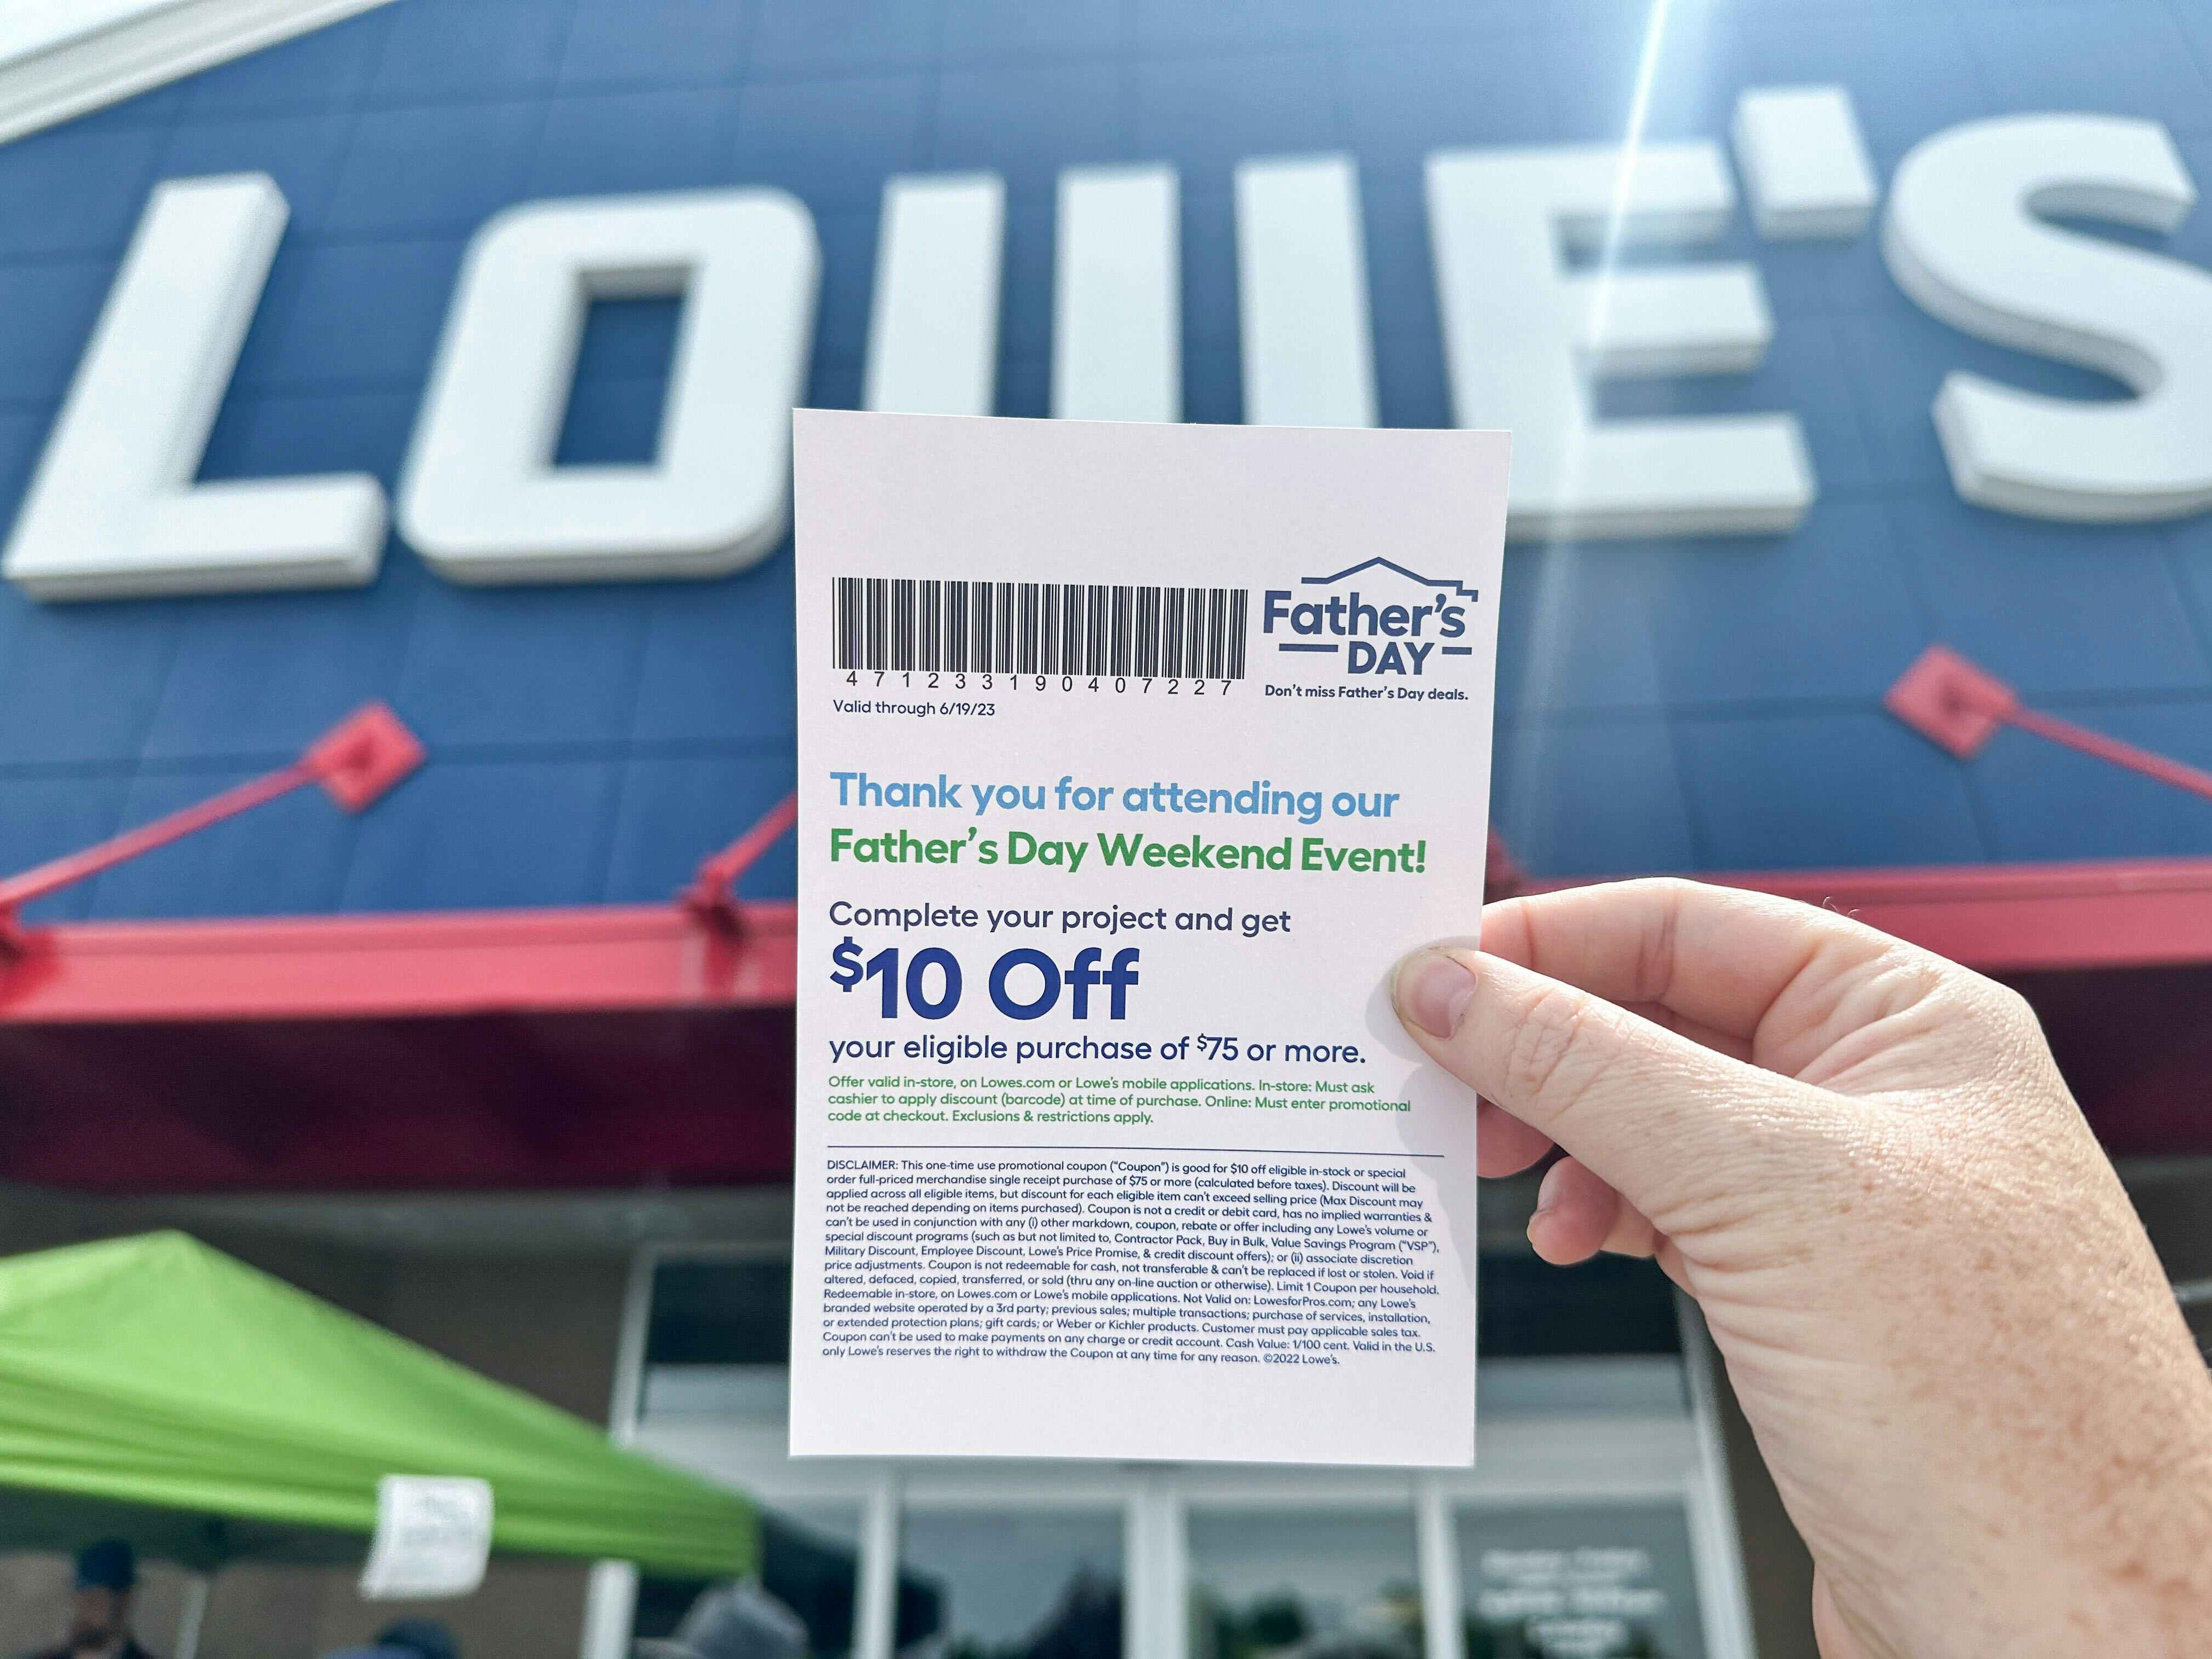 A woman's hand holding up a $10 off coupon in feront of the Lowe's storefront sign